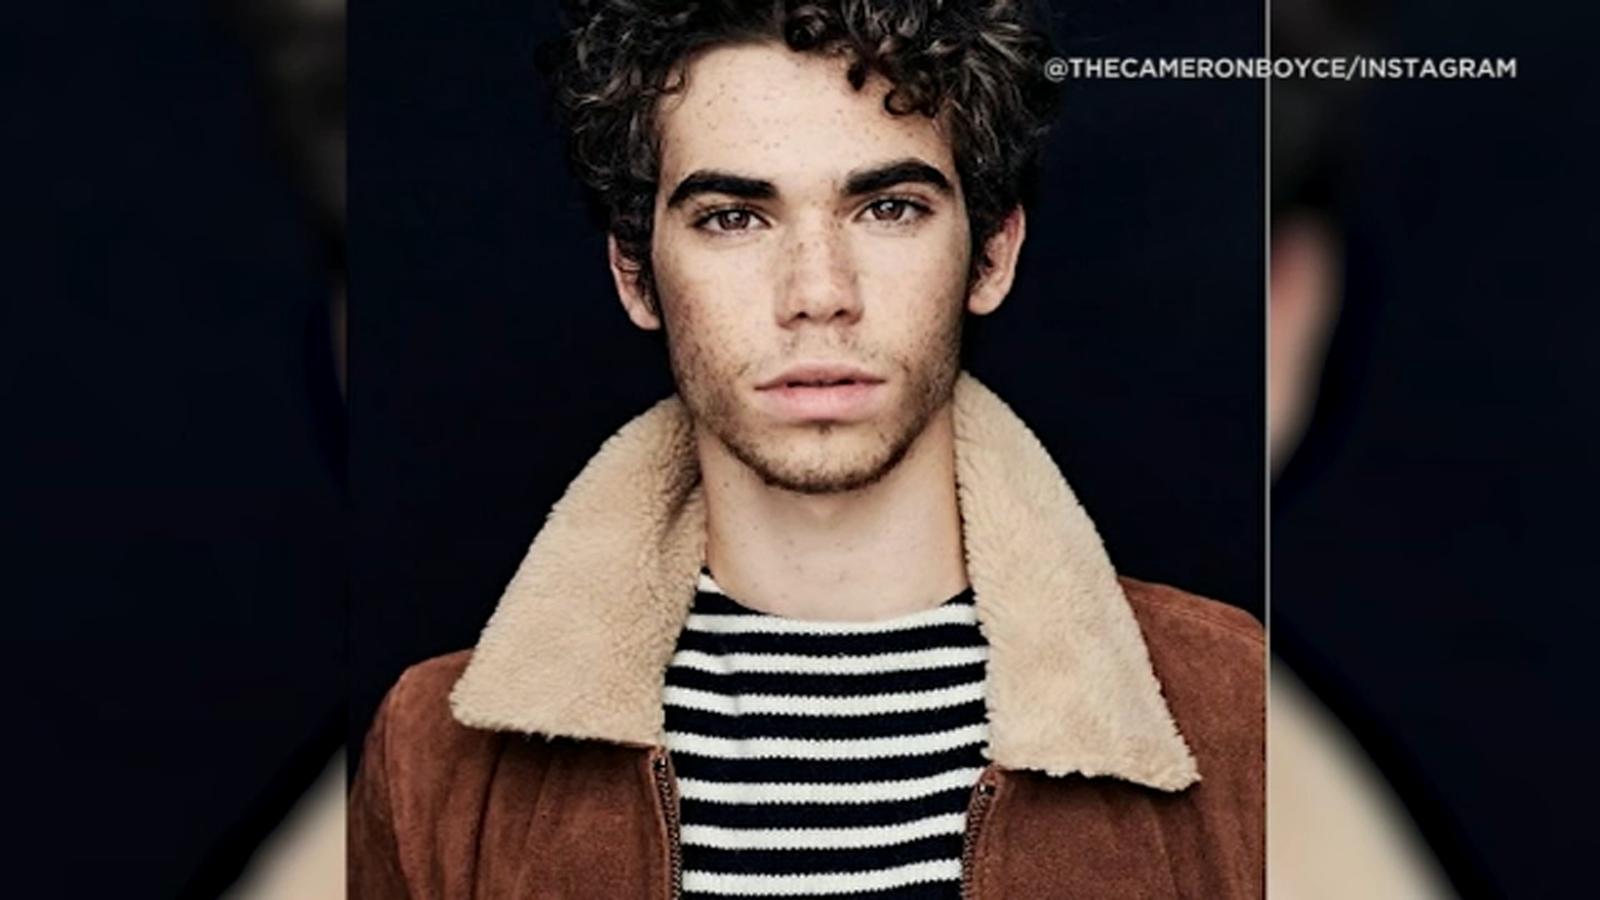 Cameron Boyce honored with Disney charitable donation in place